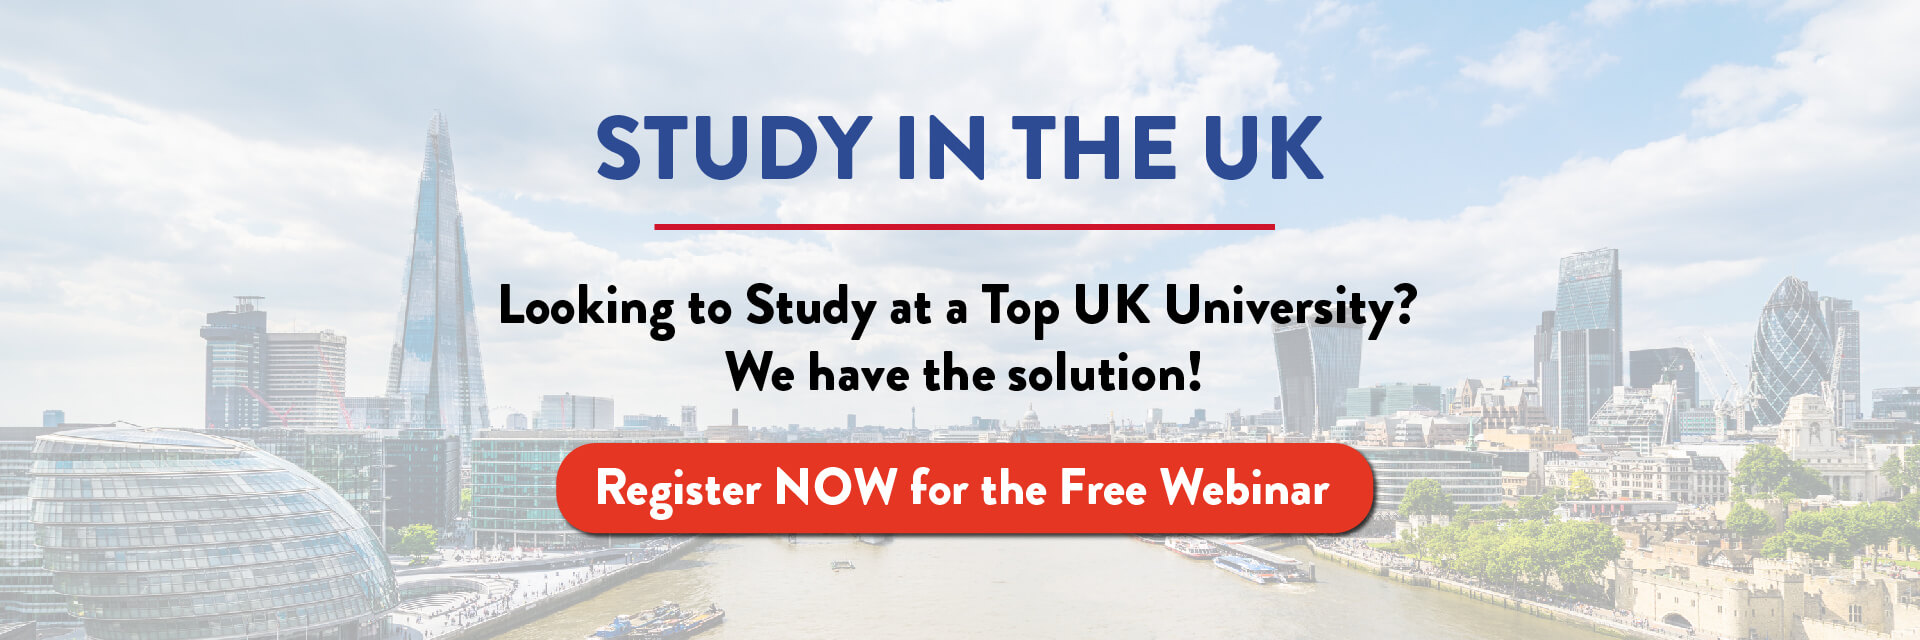 Study in the uk